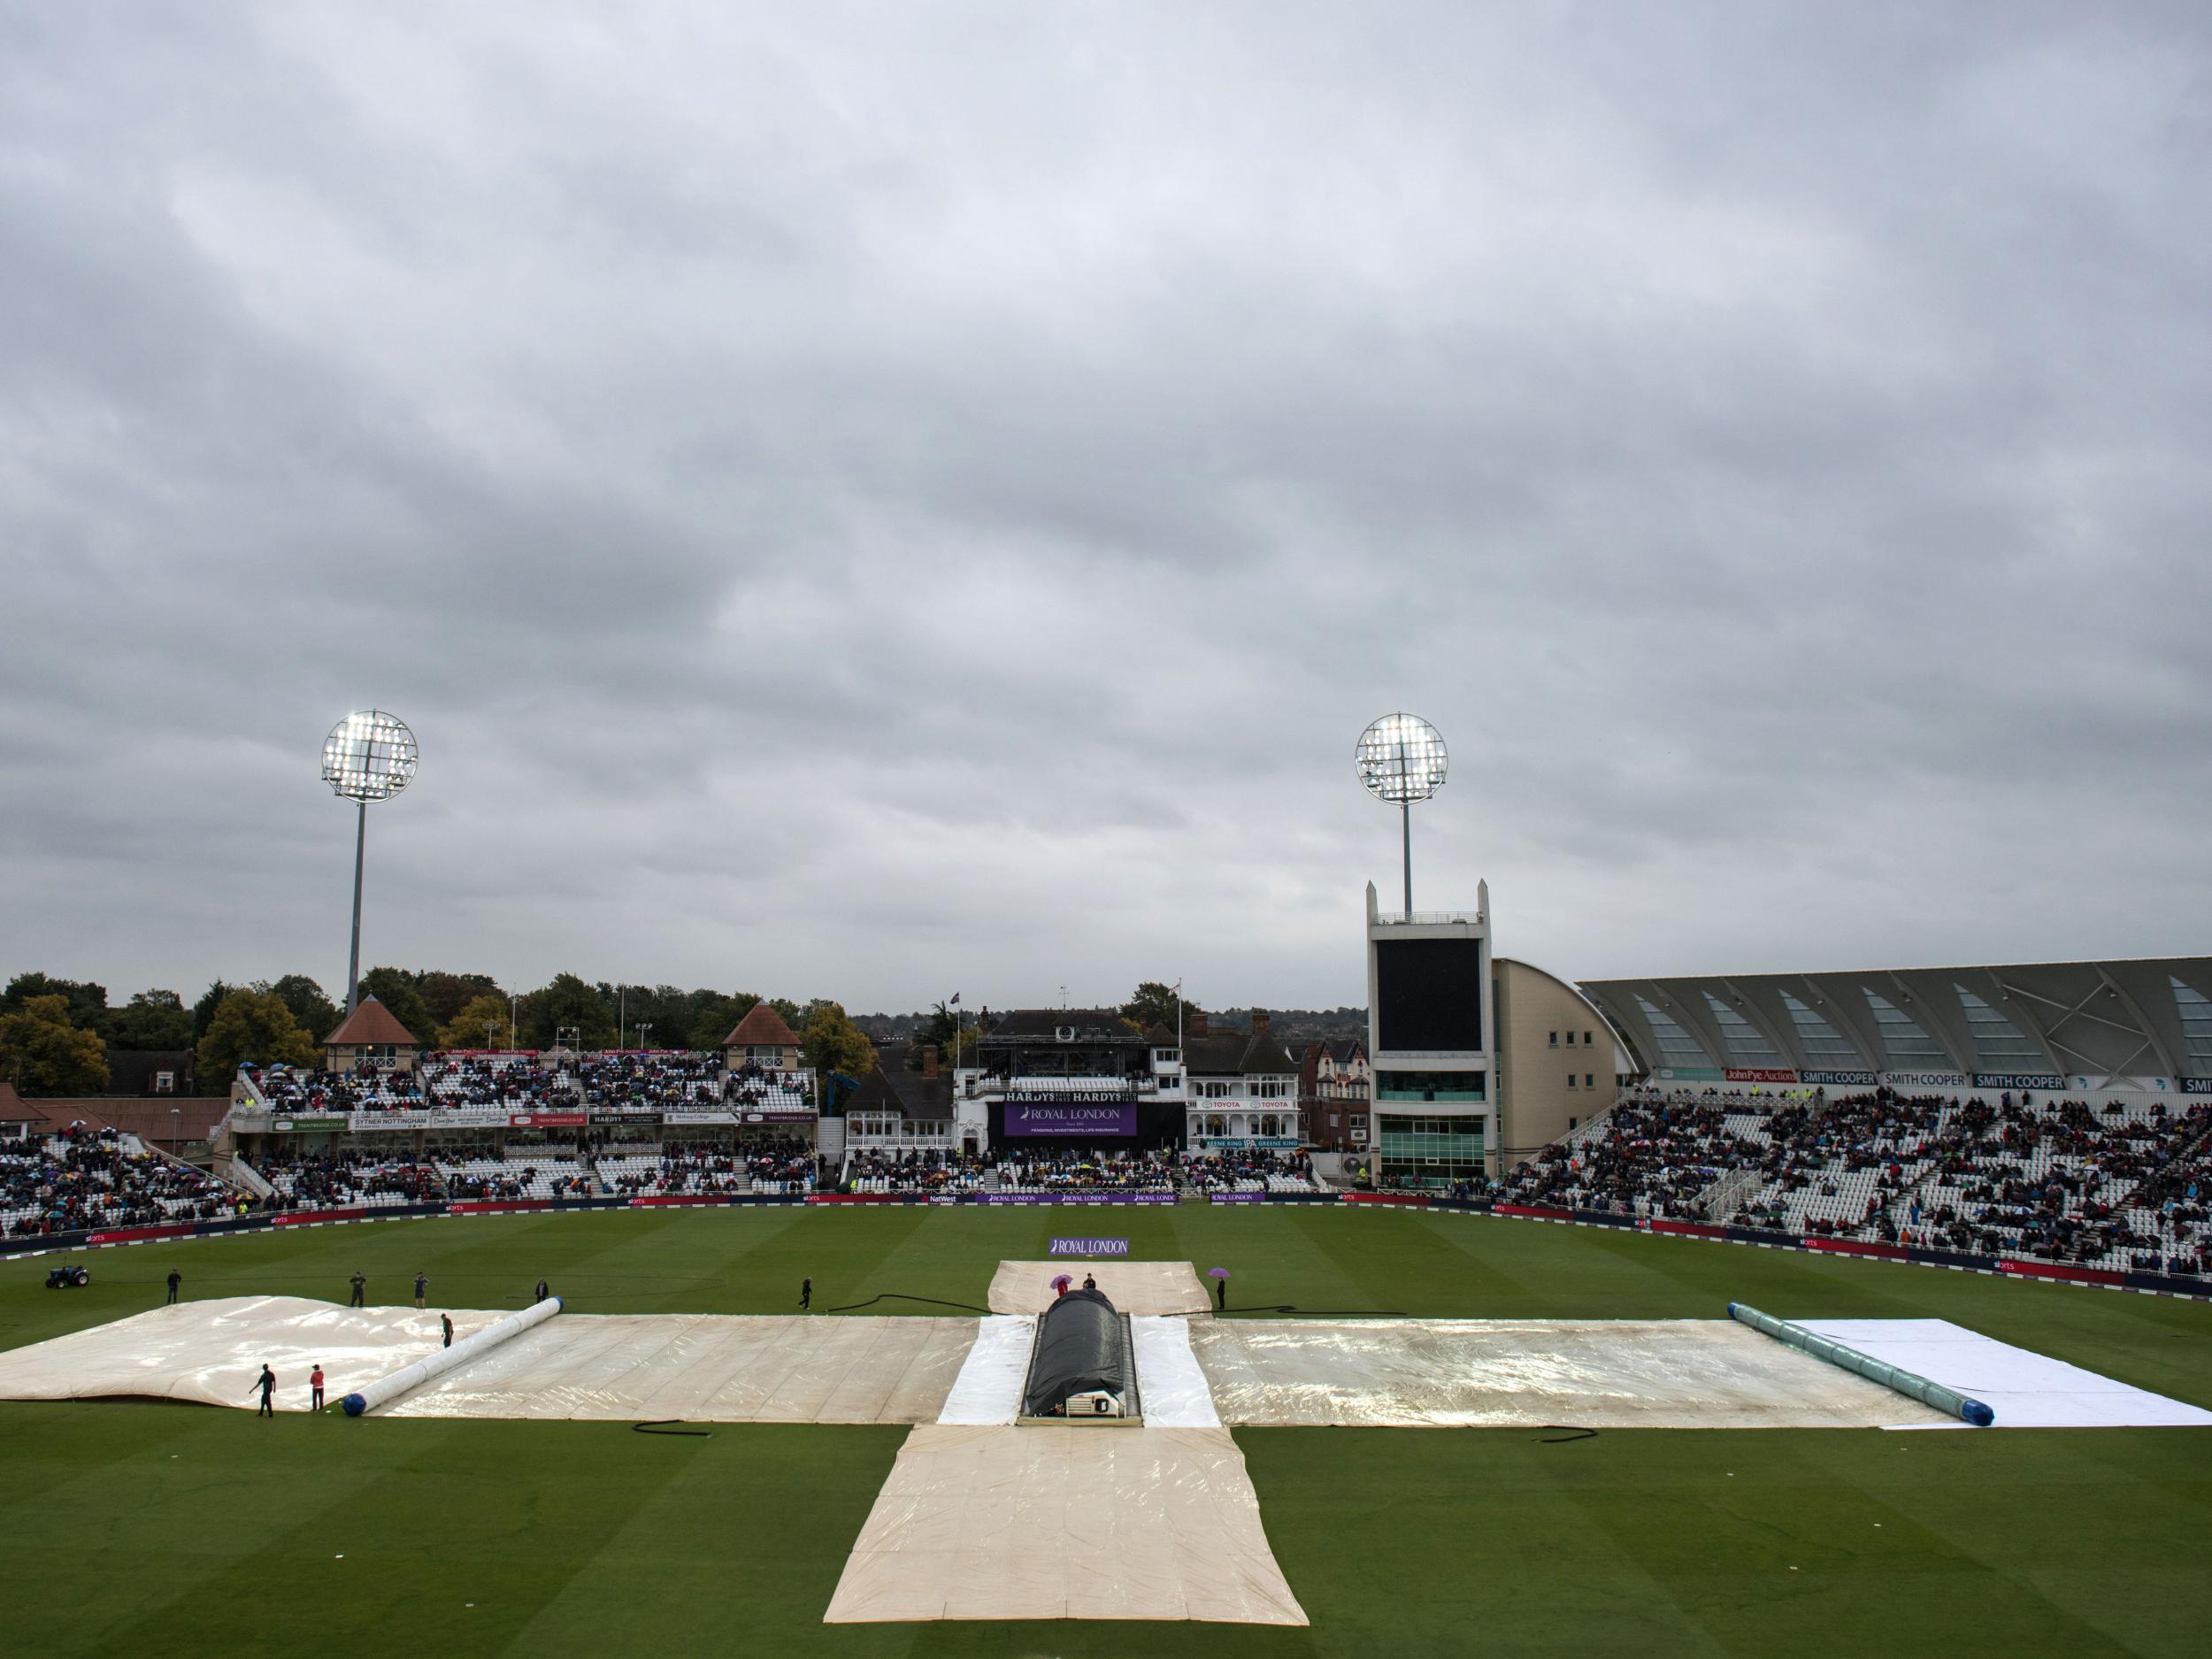 The day's action at Trent Bridge was called off for rain